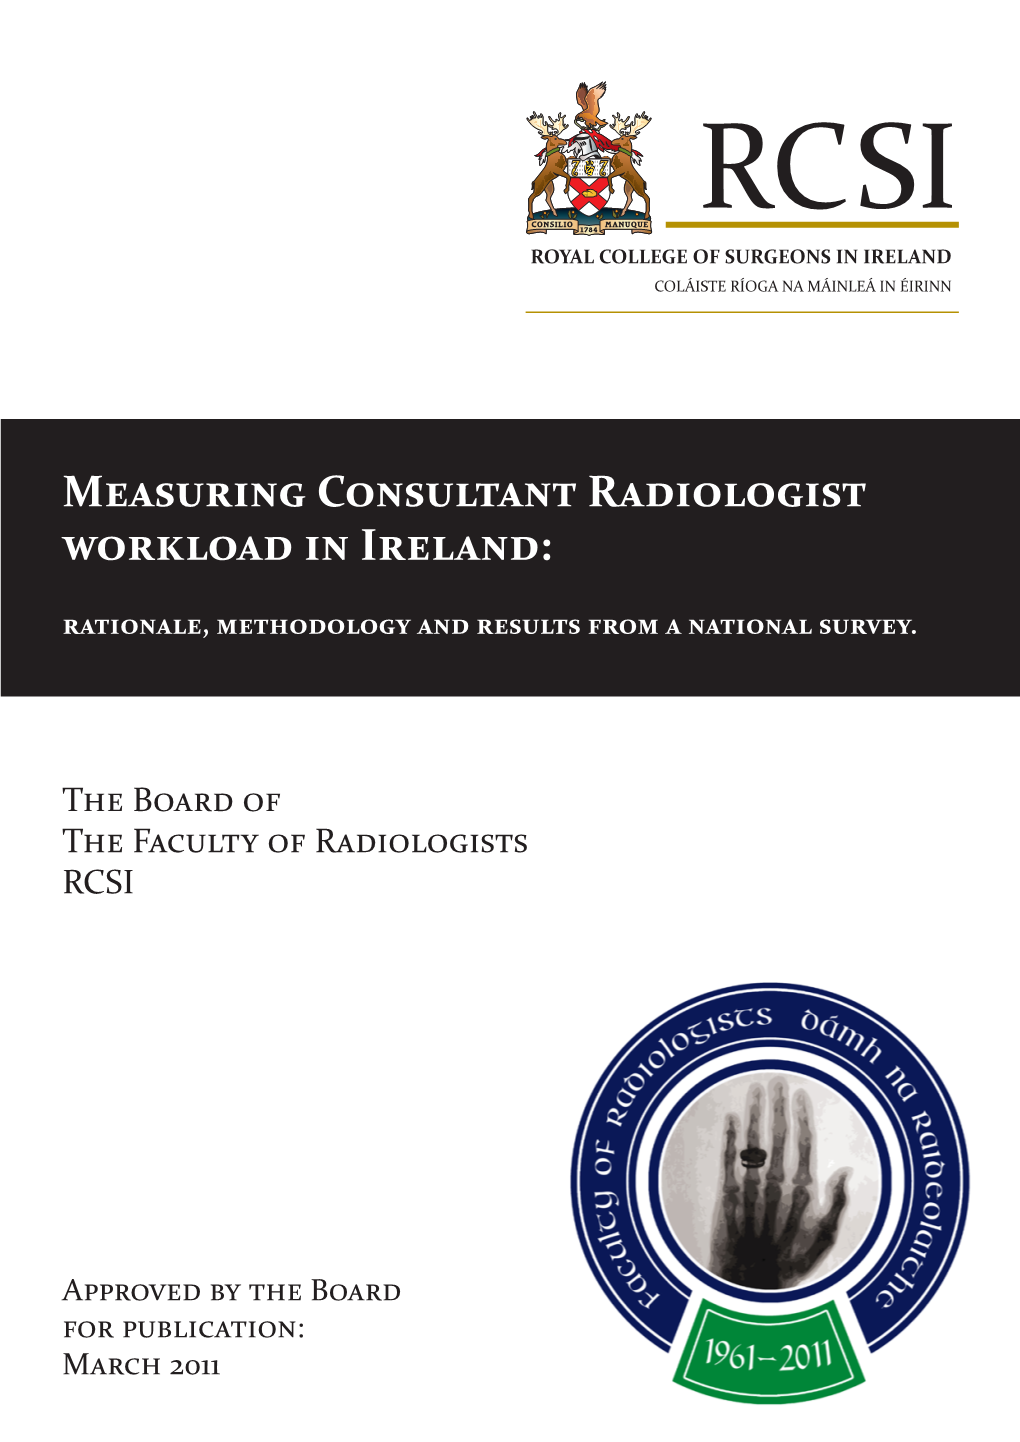 Measuring Consultant Radiologist Workload in Ireland: Rationale, Methodology and Results from a National Survey